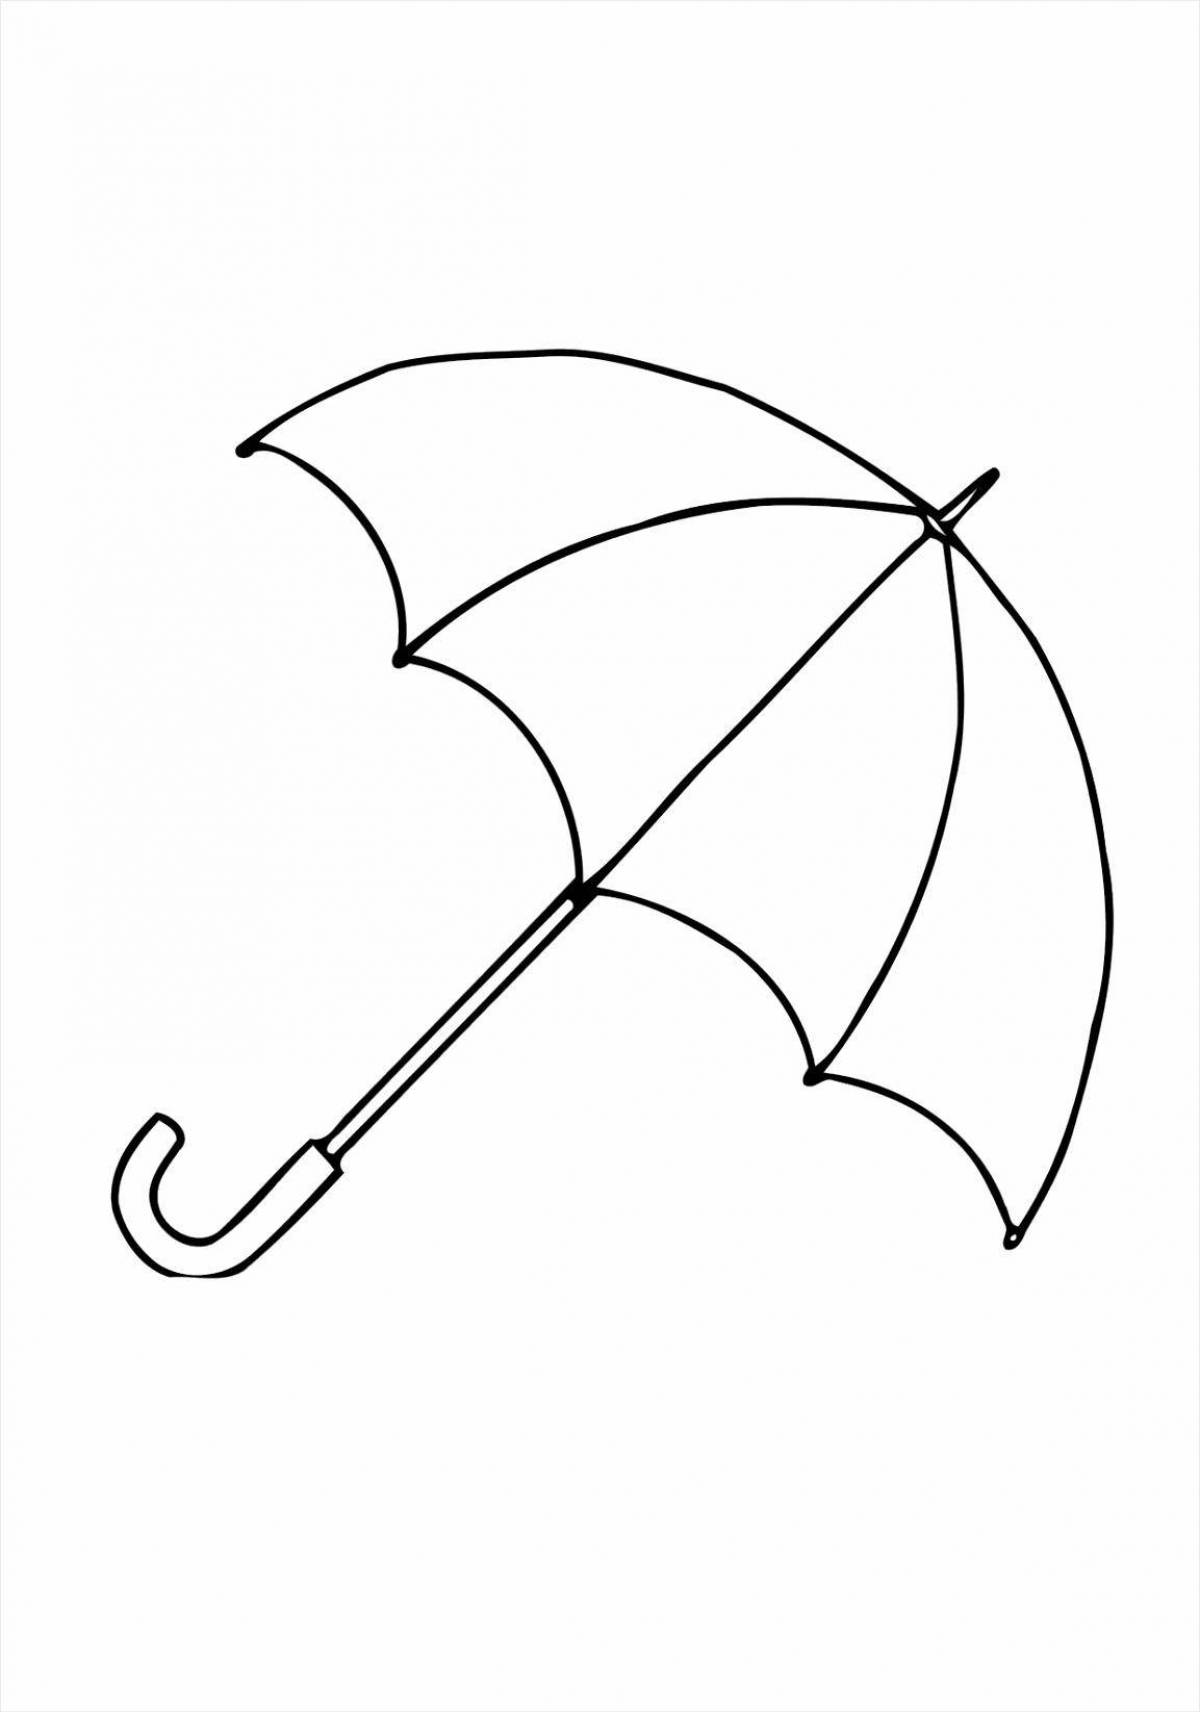 Colourful umbrella coloring book for children 4-5 years old